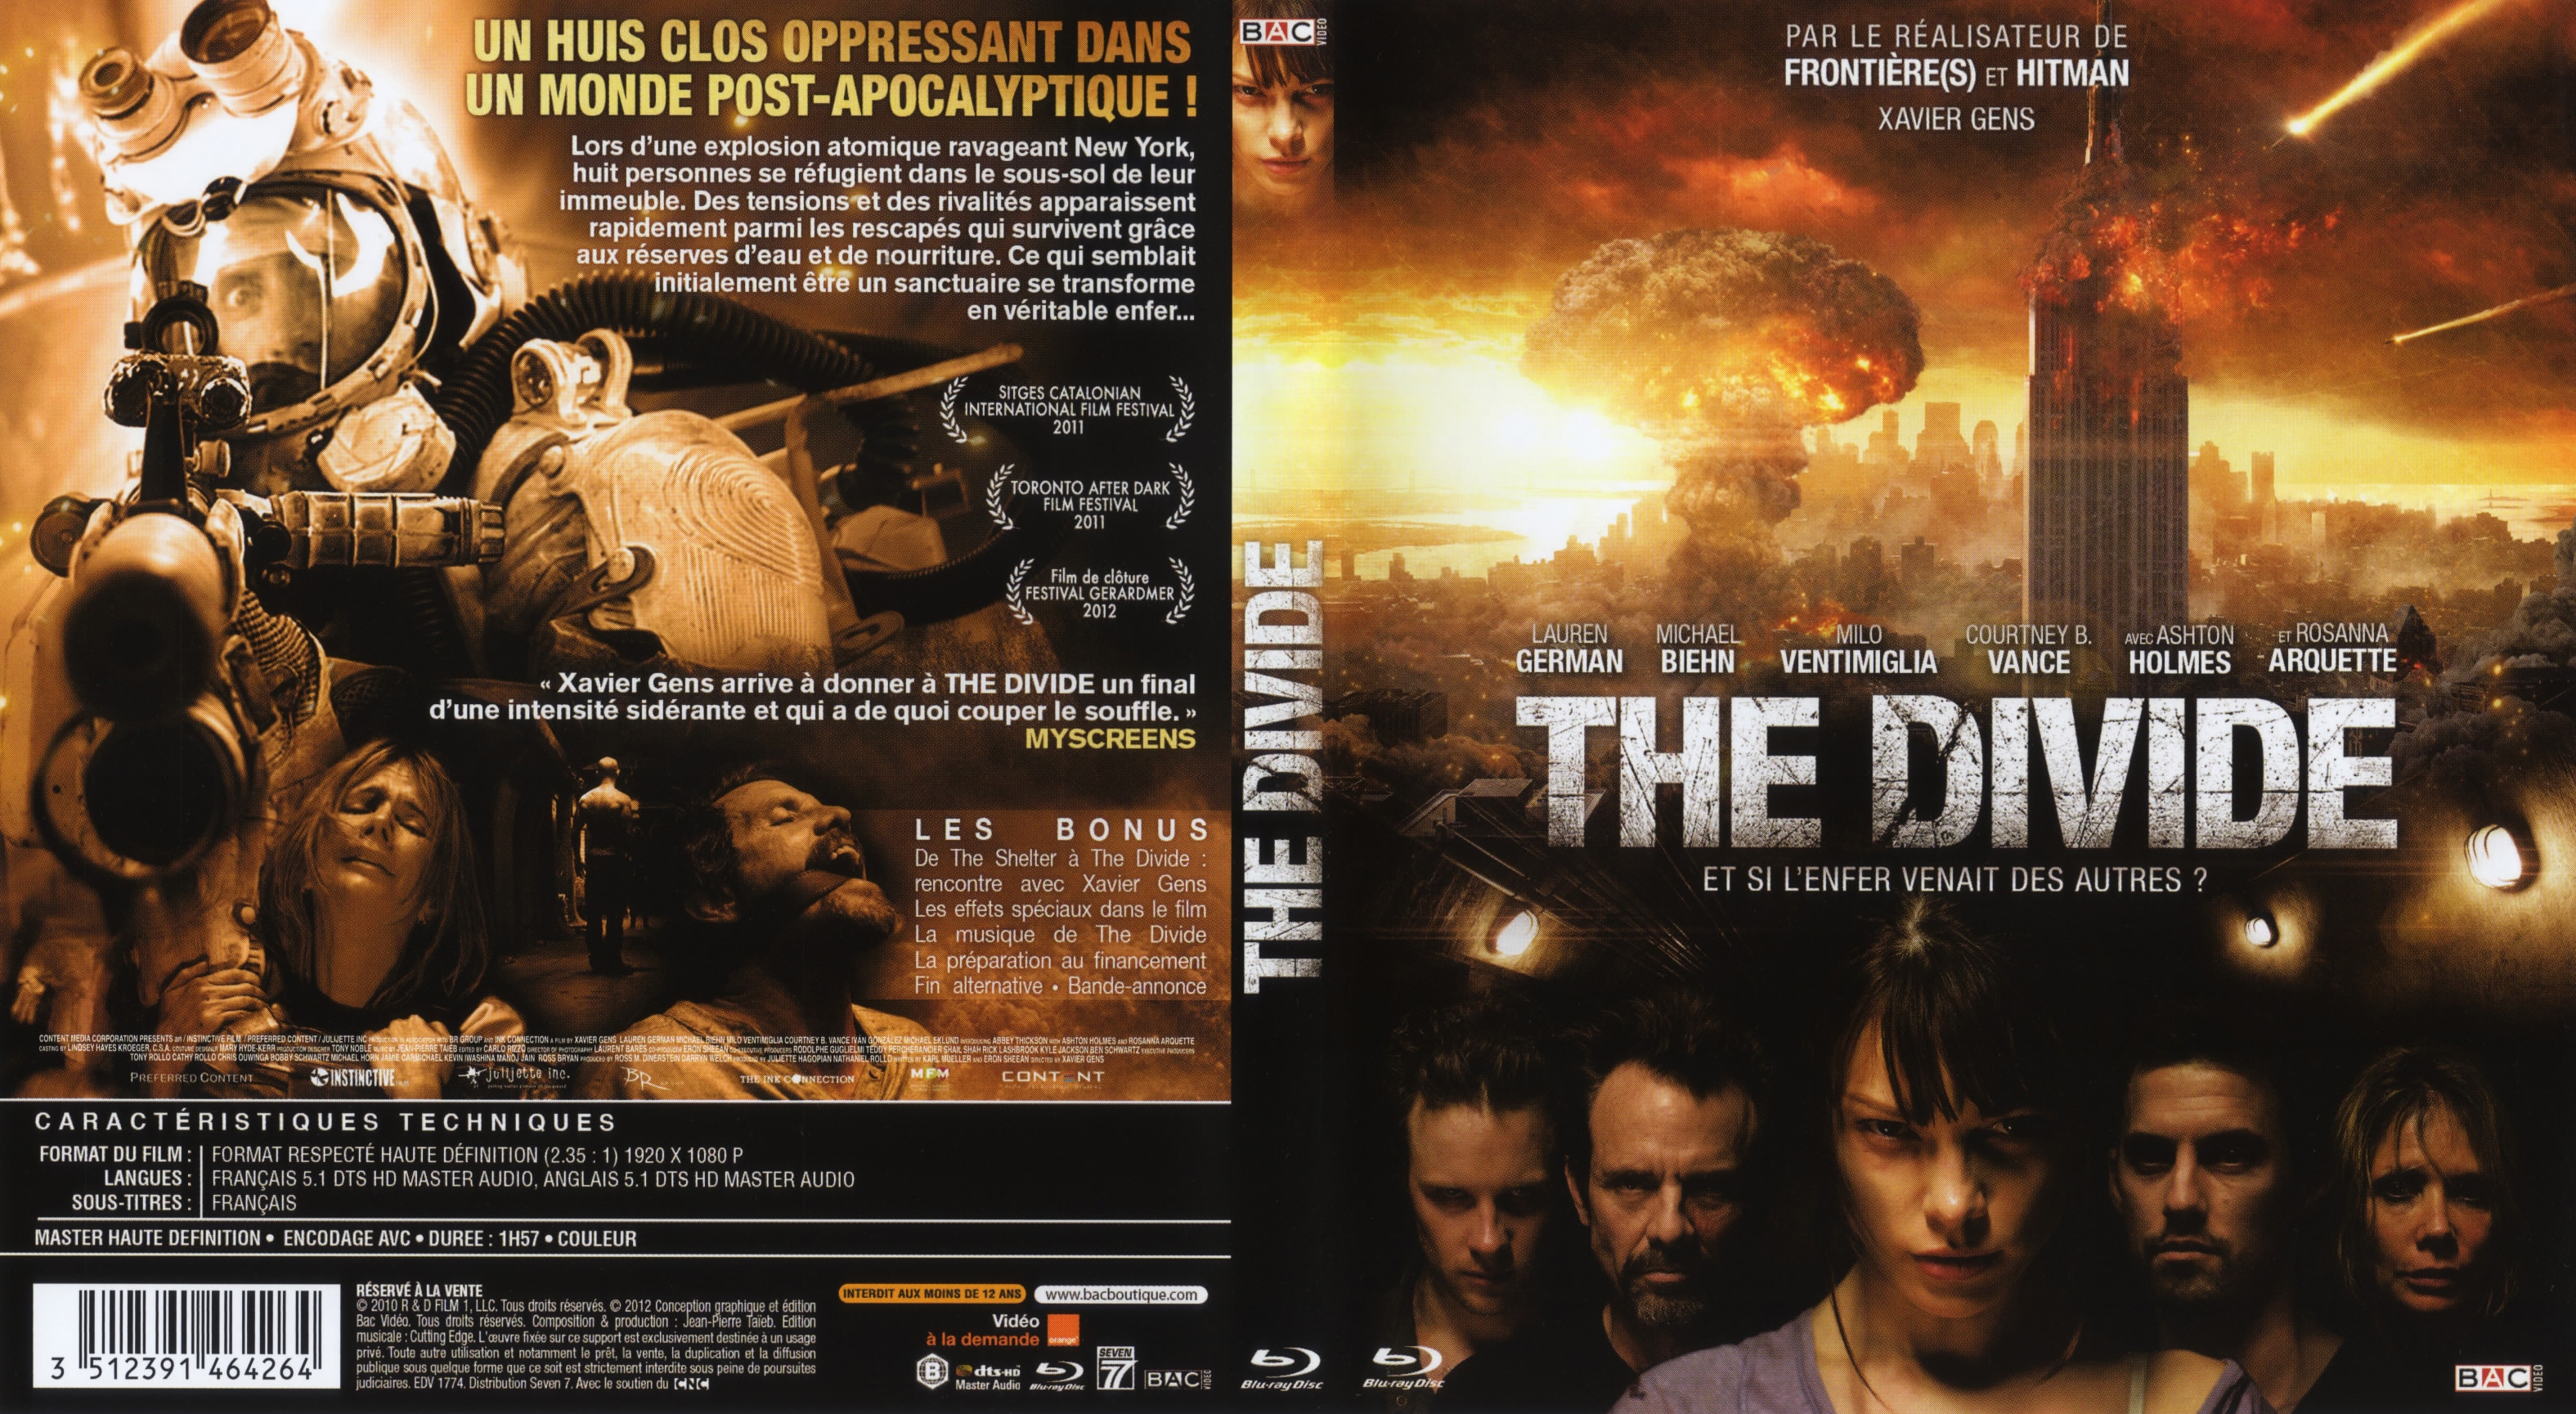 Jaquette DVD The divide (BLU-RAY)